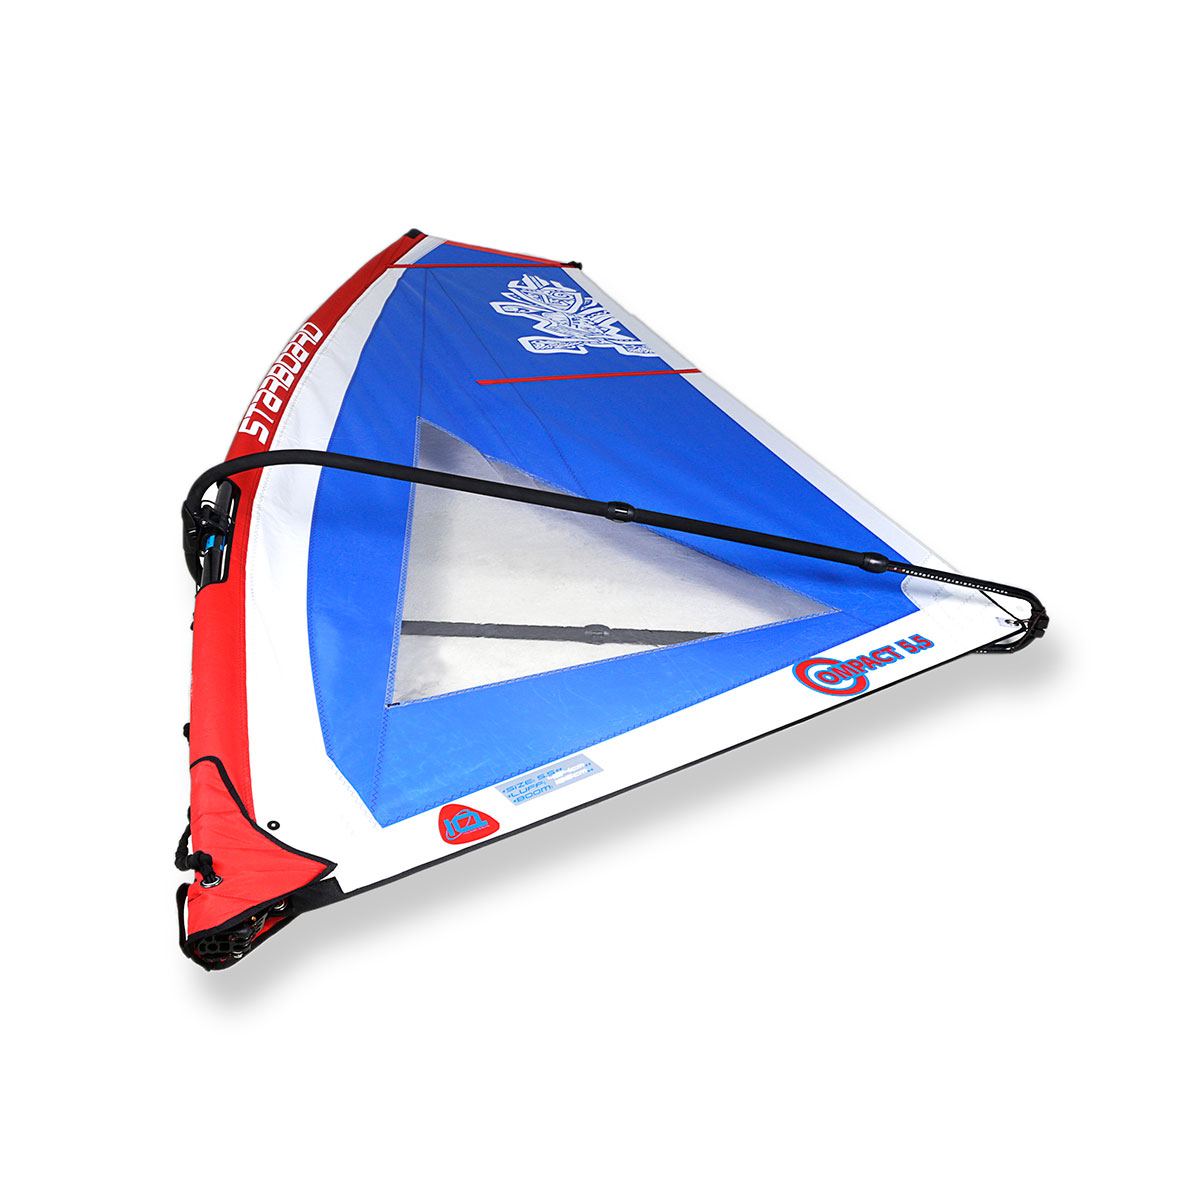 Starboard SUP Windsurfing Sail Compact Package
